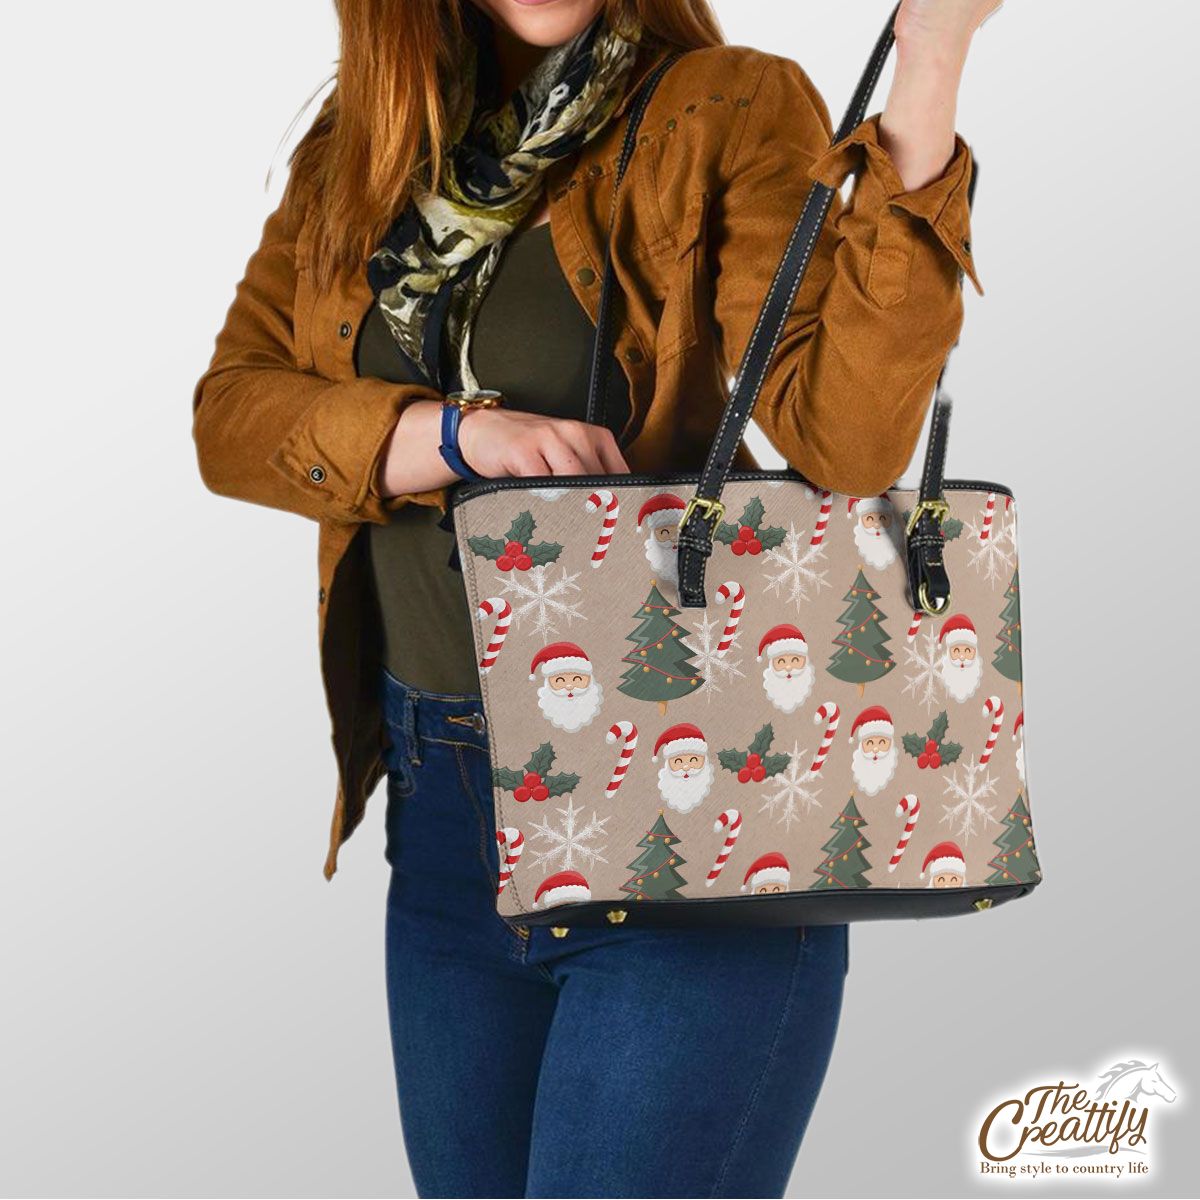 Santa Clause, Christmas Tree, Candy Cane, Holly Leaf On Snowflake Background Leather Tote Bag